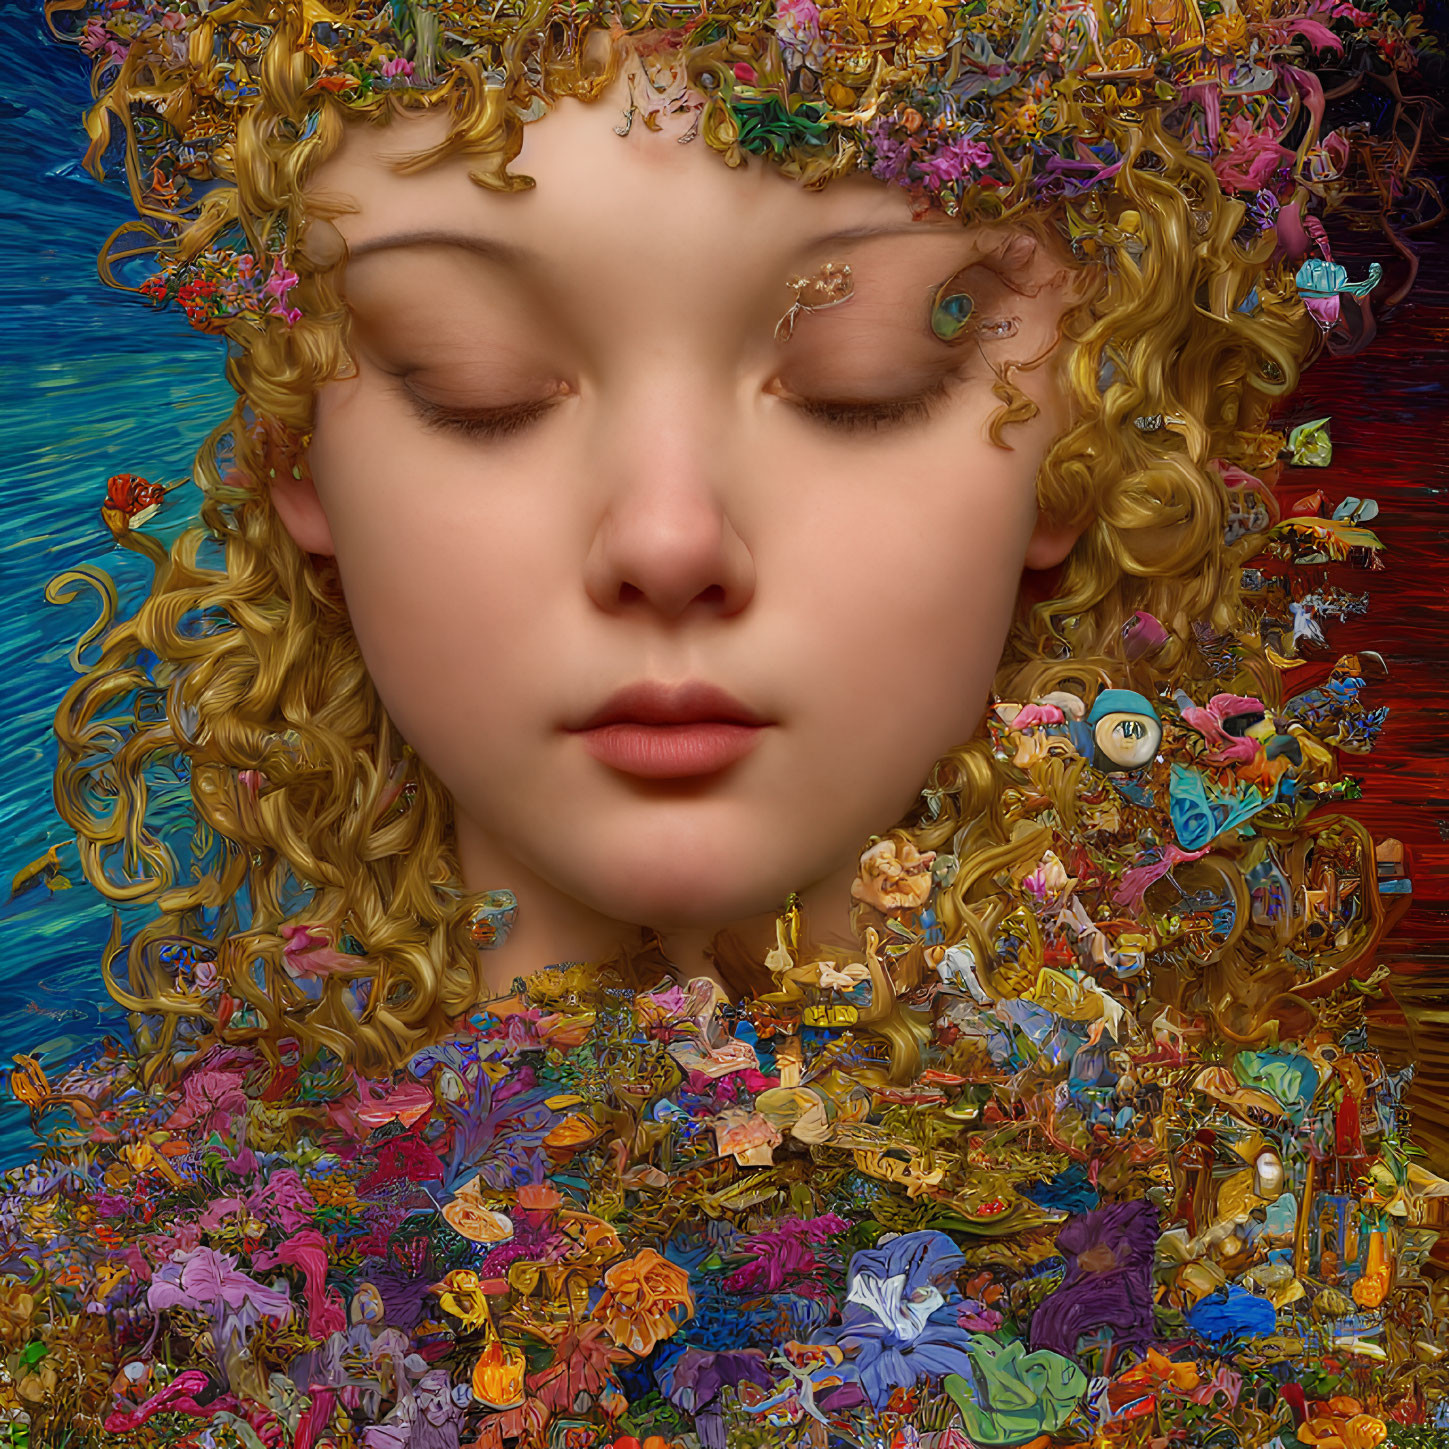 Detailed Digital Art Portrait of Young Woman with Floral and Faunal Elements